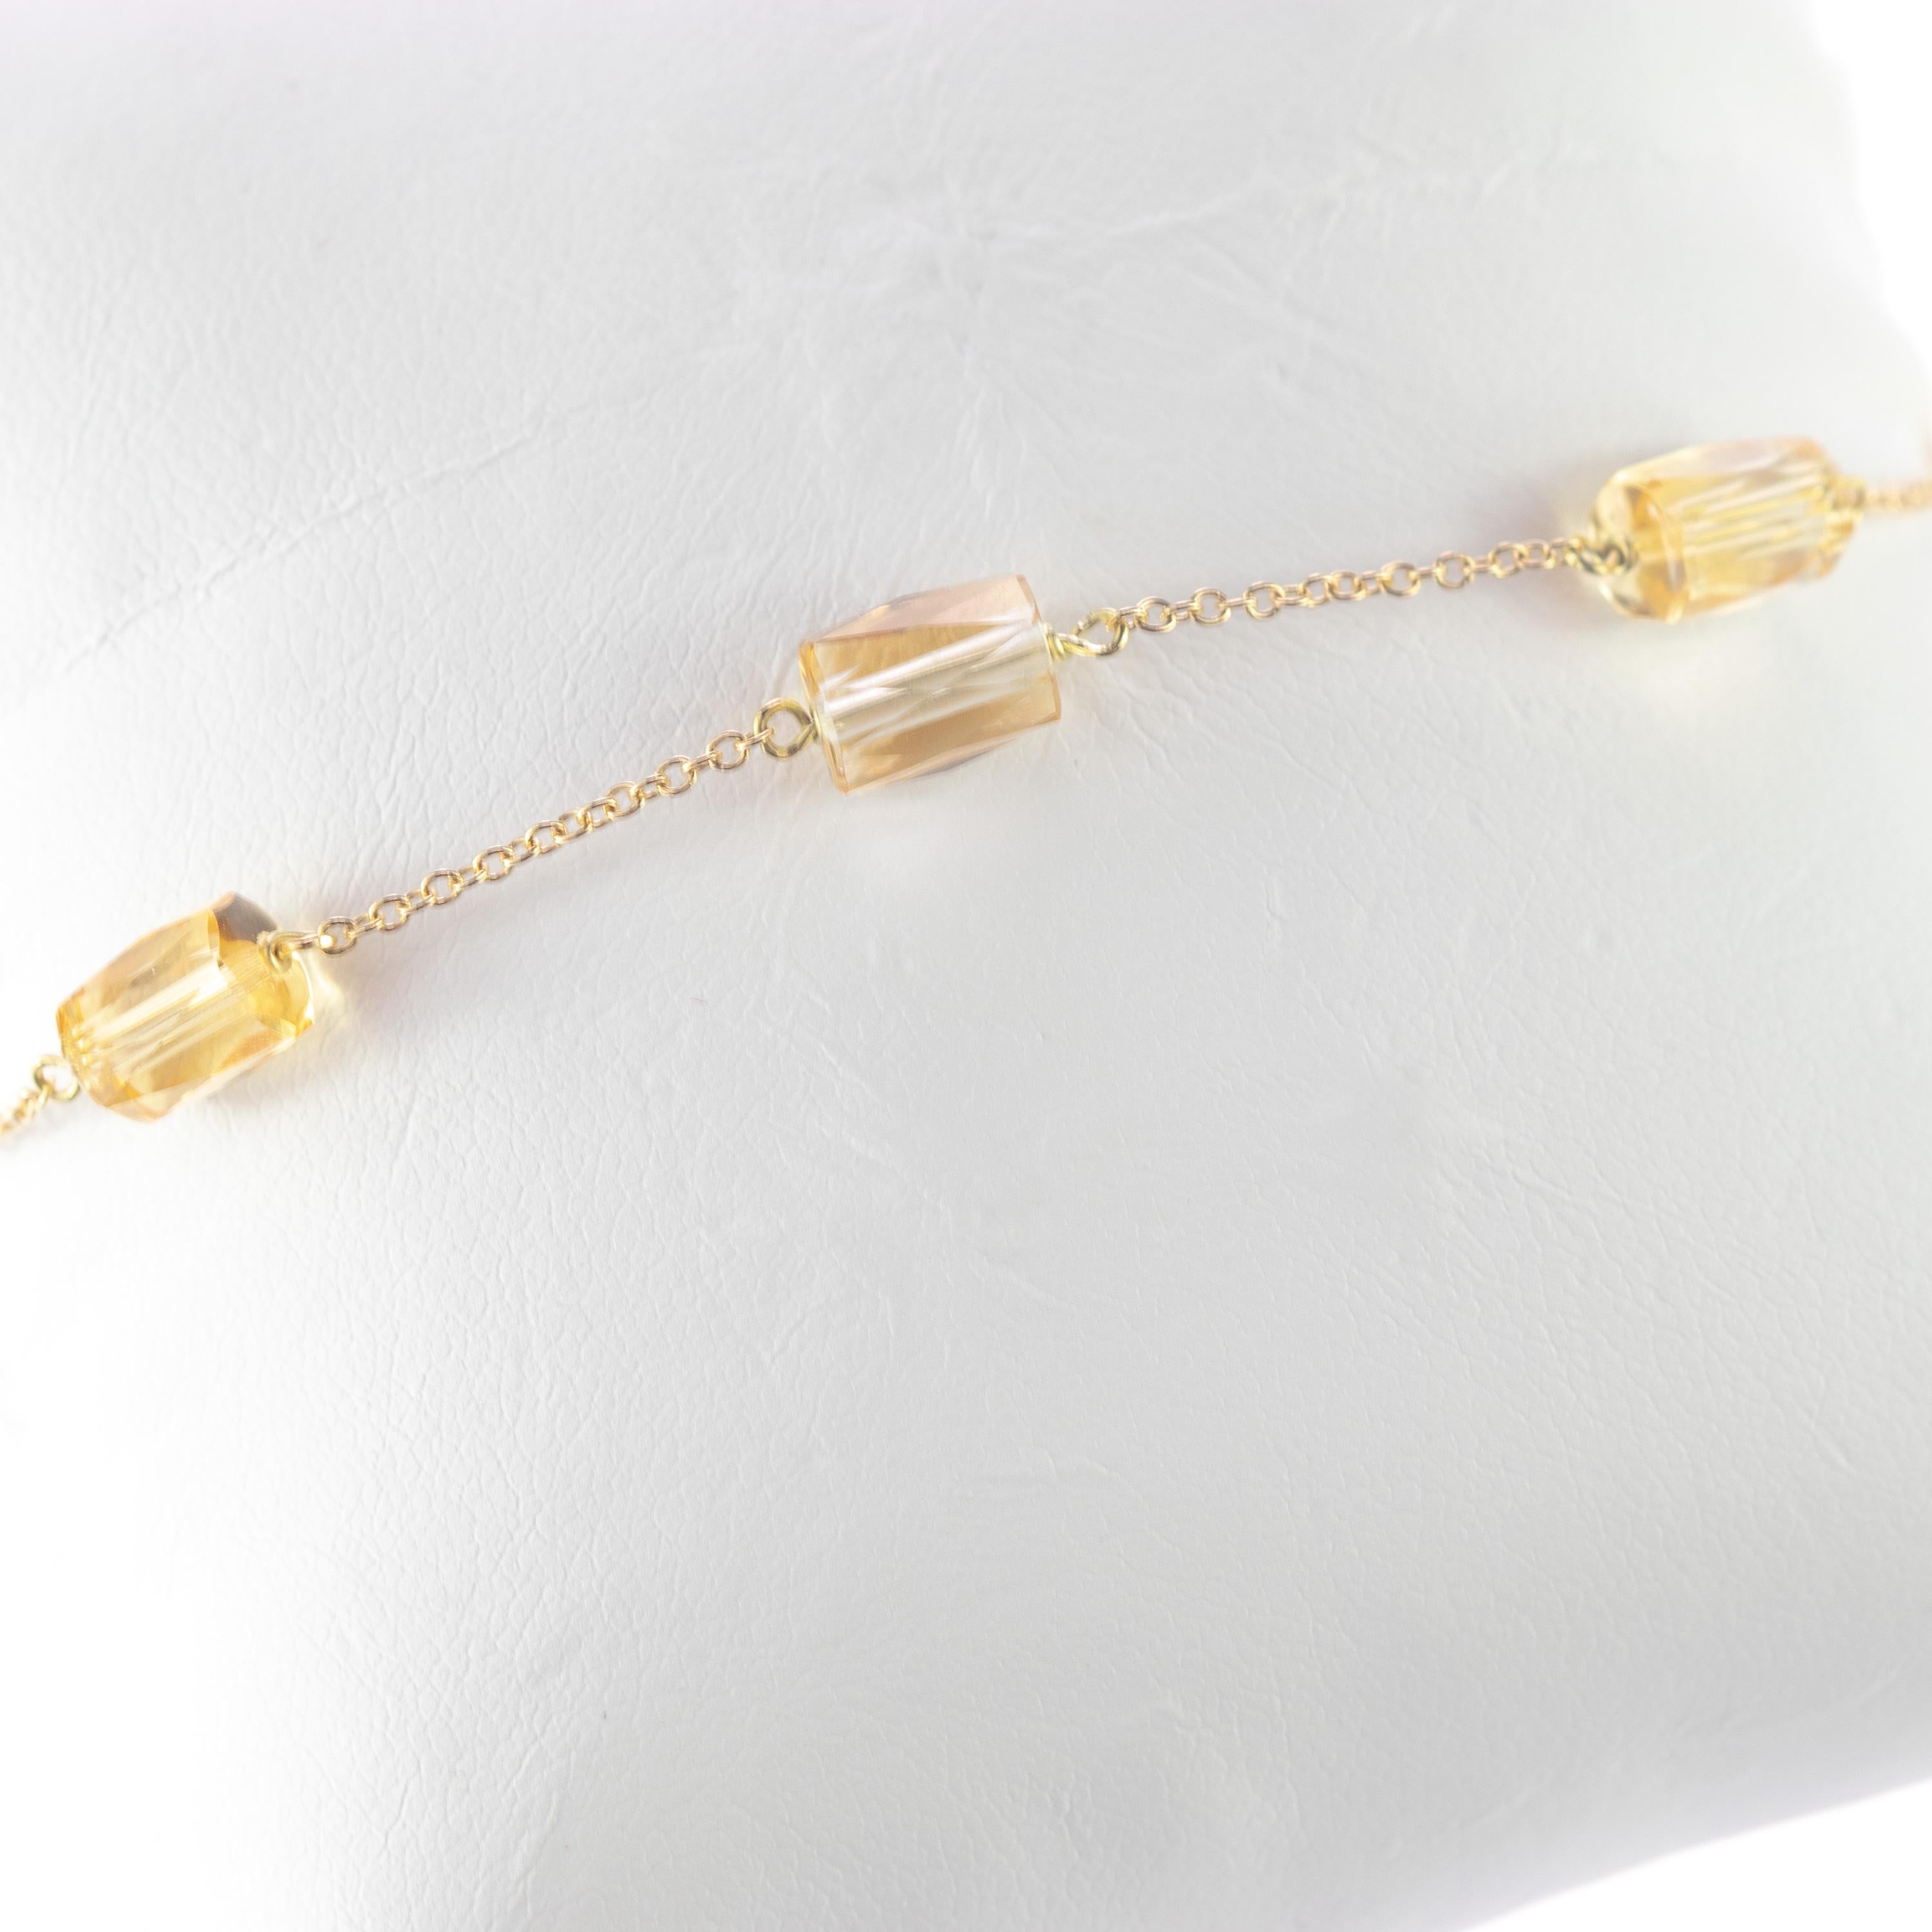 Intini Jewels signature quality on a modern and contemporary design jewel. Bracelet or Anklet.

Six gems of top quality pure citrine quartz embellish a delicate Gold Plate chain bracelet.
 
An elegant touch of glamour at your fingertips. Let